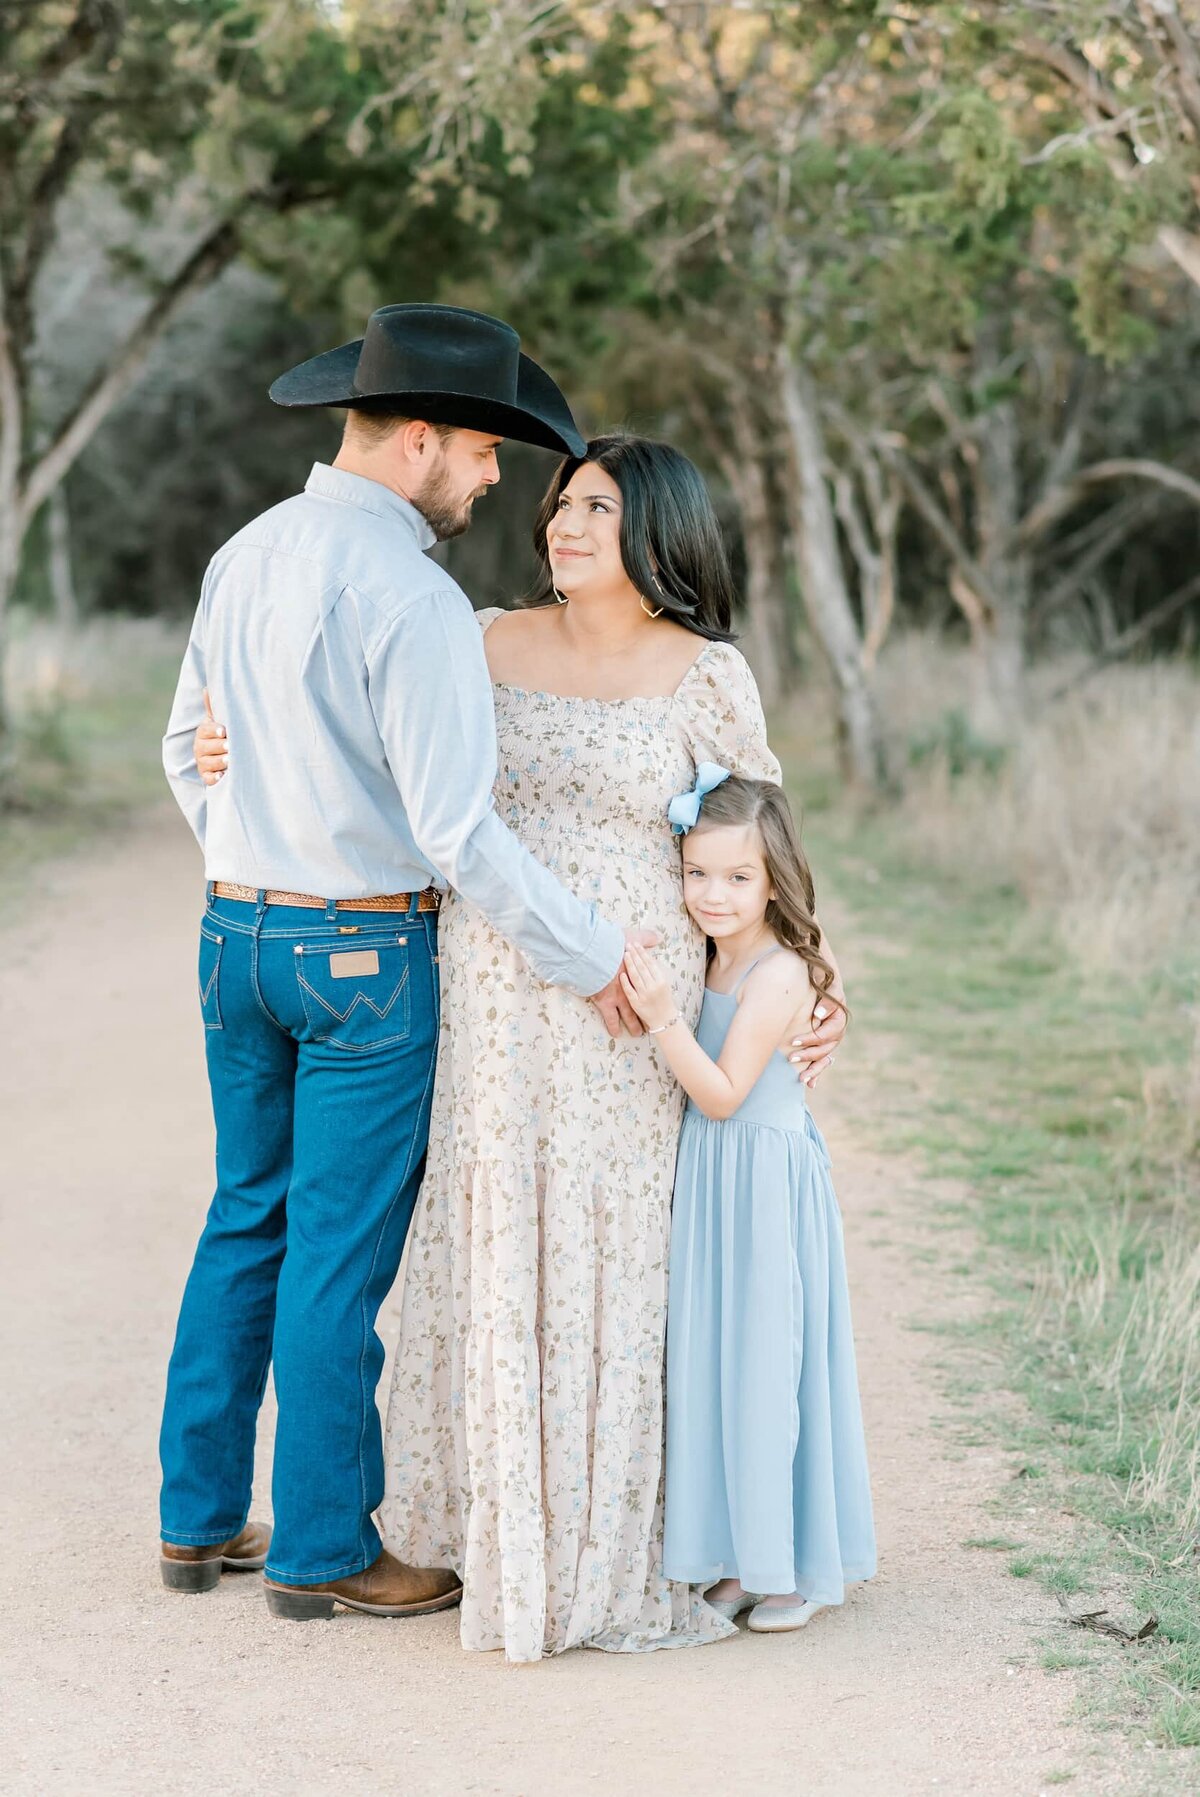 San-Antonio-Maternity-Photography-3.4.23- Melanie_s Maternity Session- Laurie Adalle Photography-58